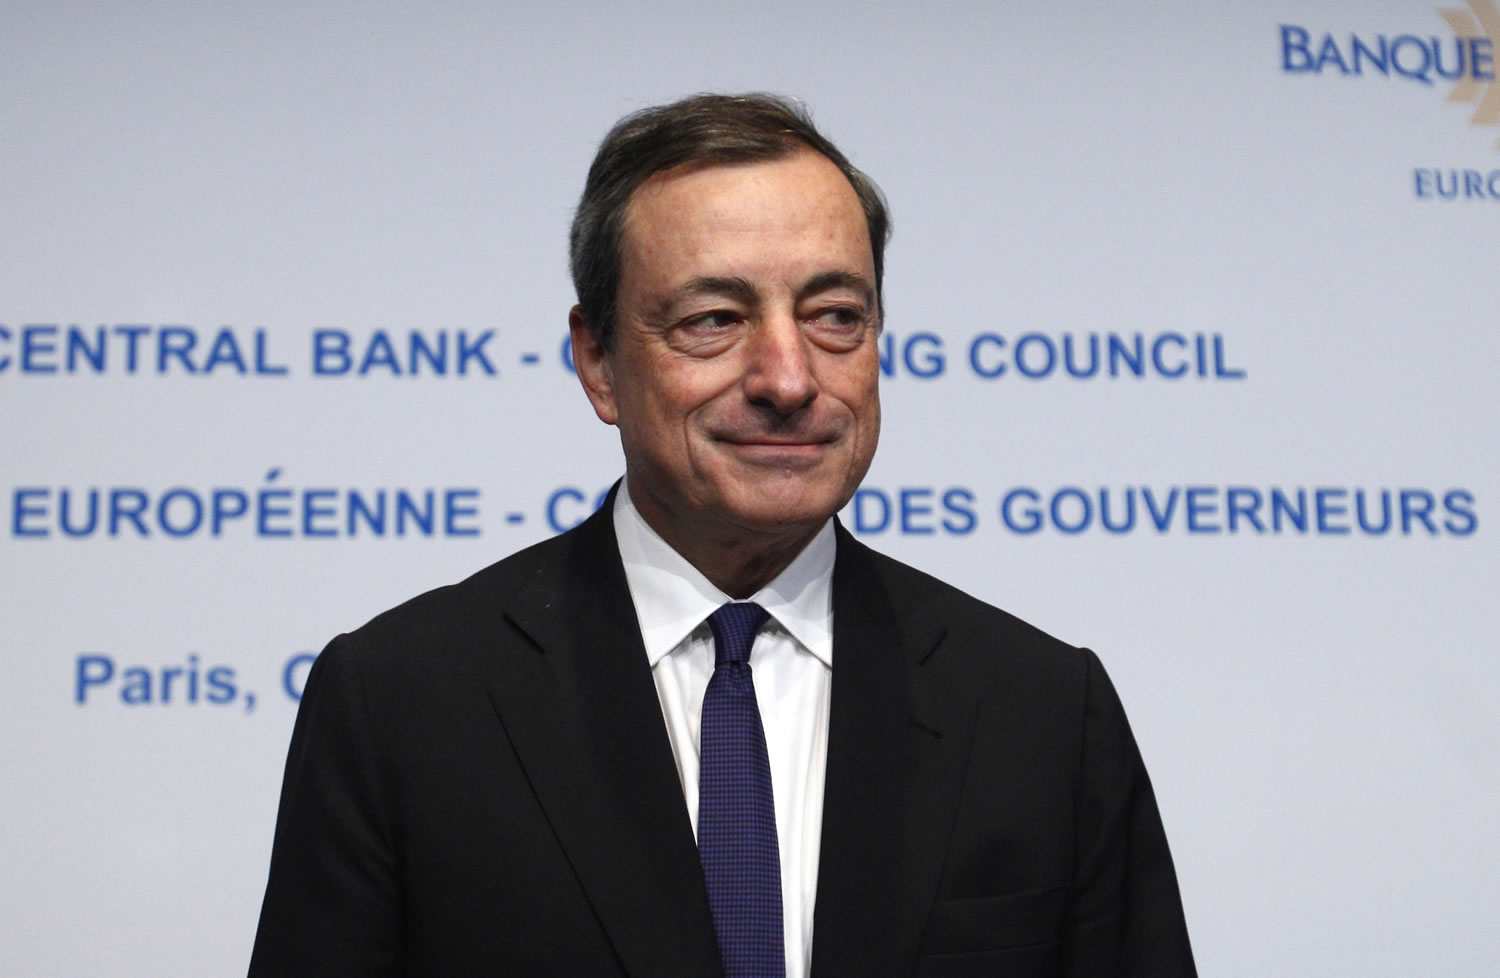 President of the European Central Bank Mario Draghi attends a news conference of the European Central Bank at the French National Bank in Paris on Wednesday.